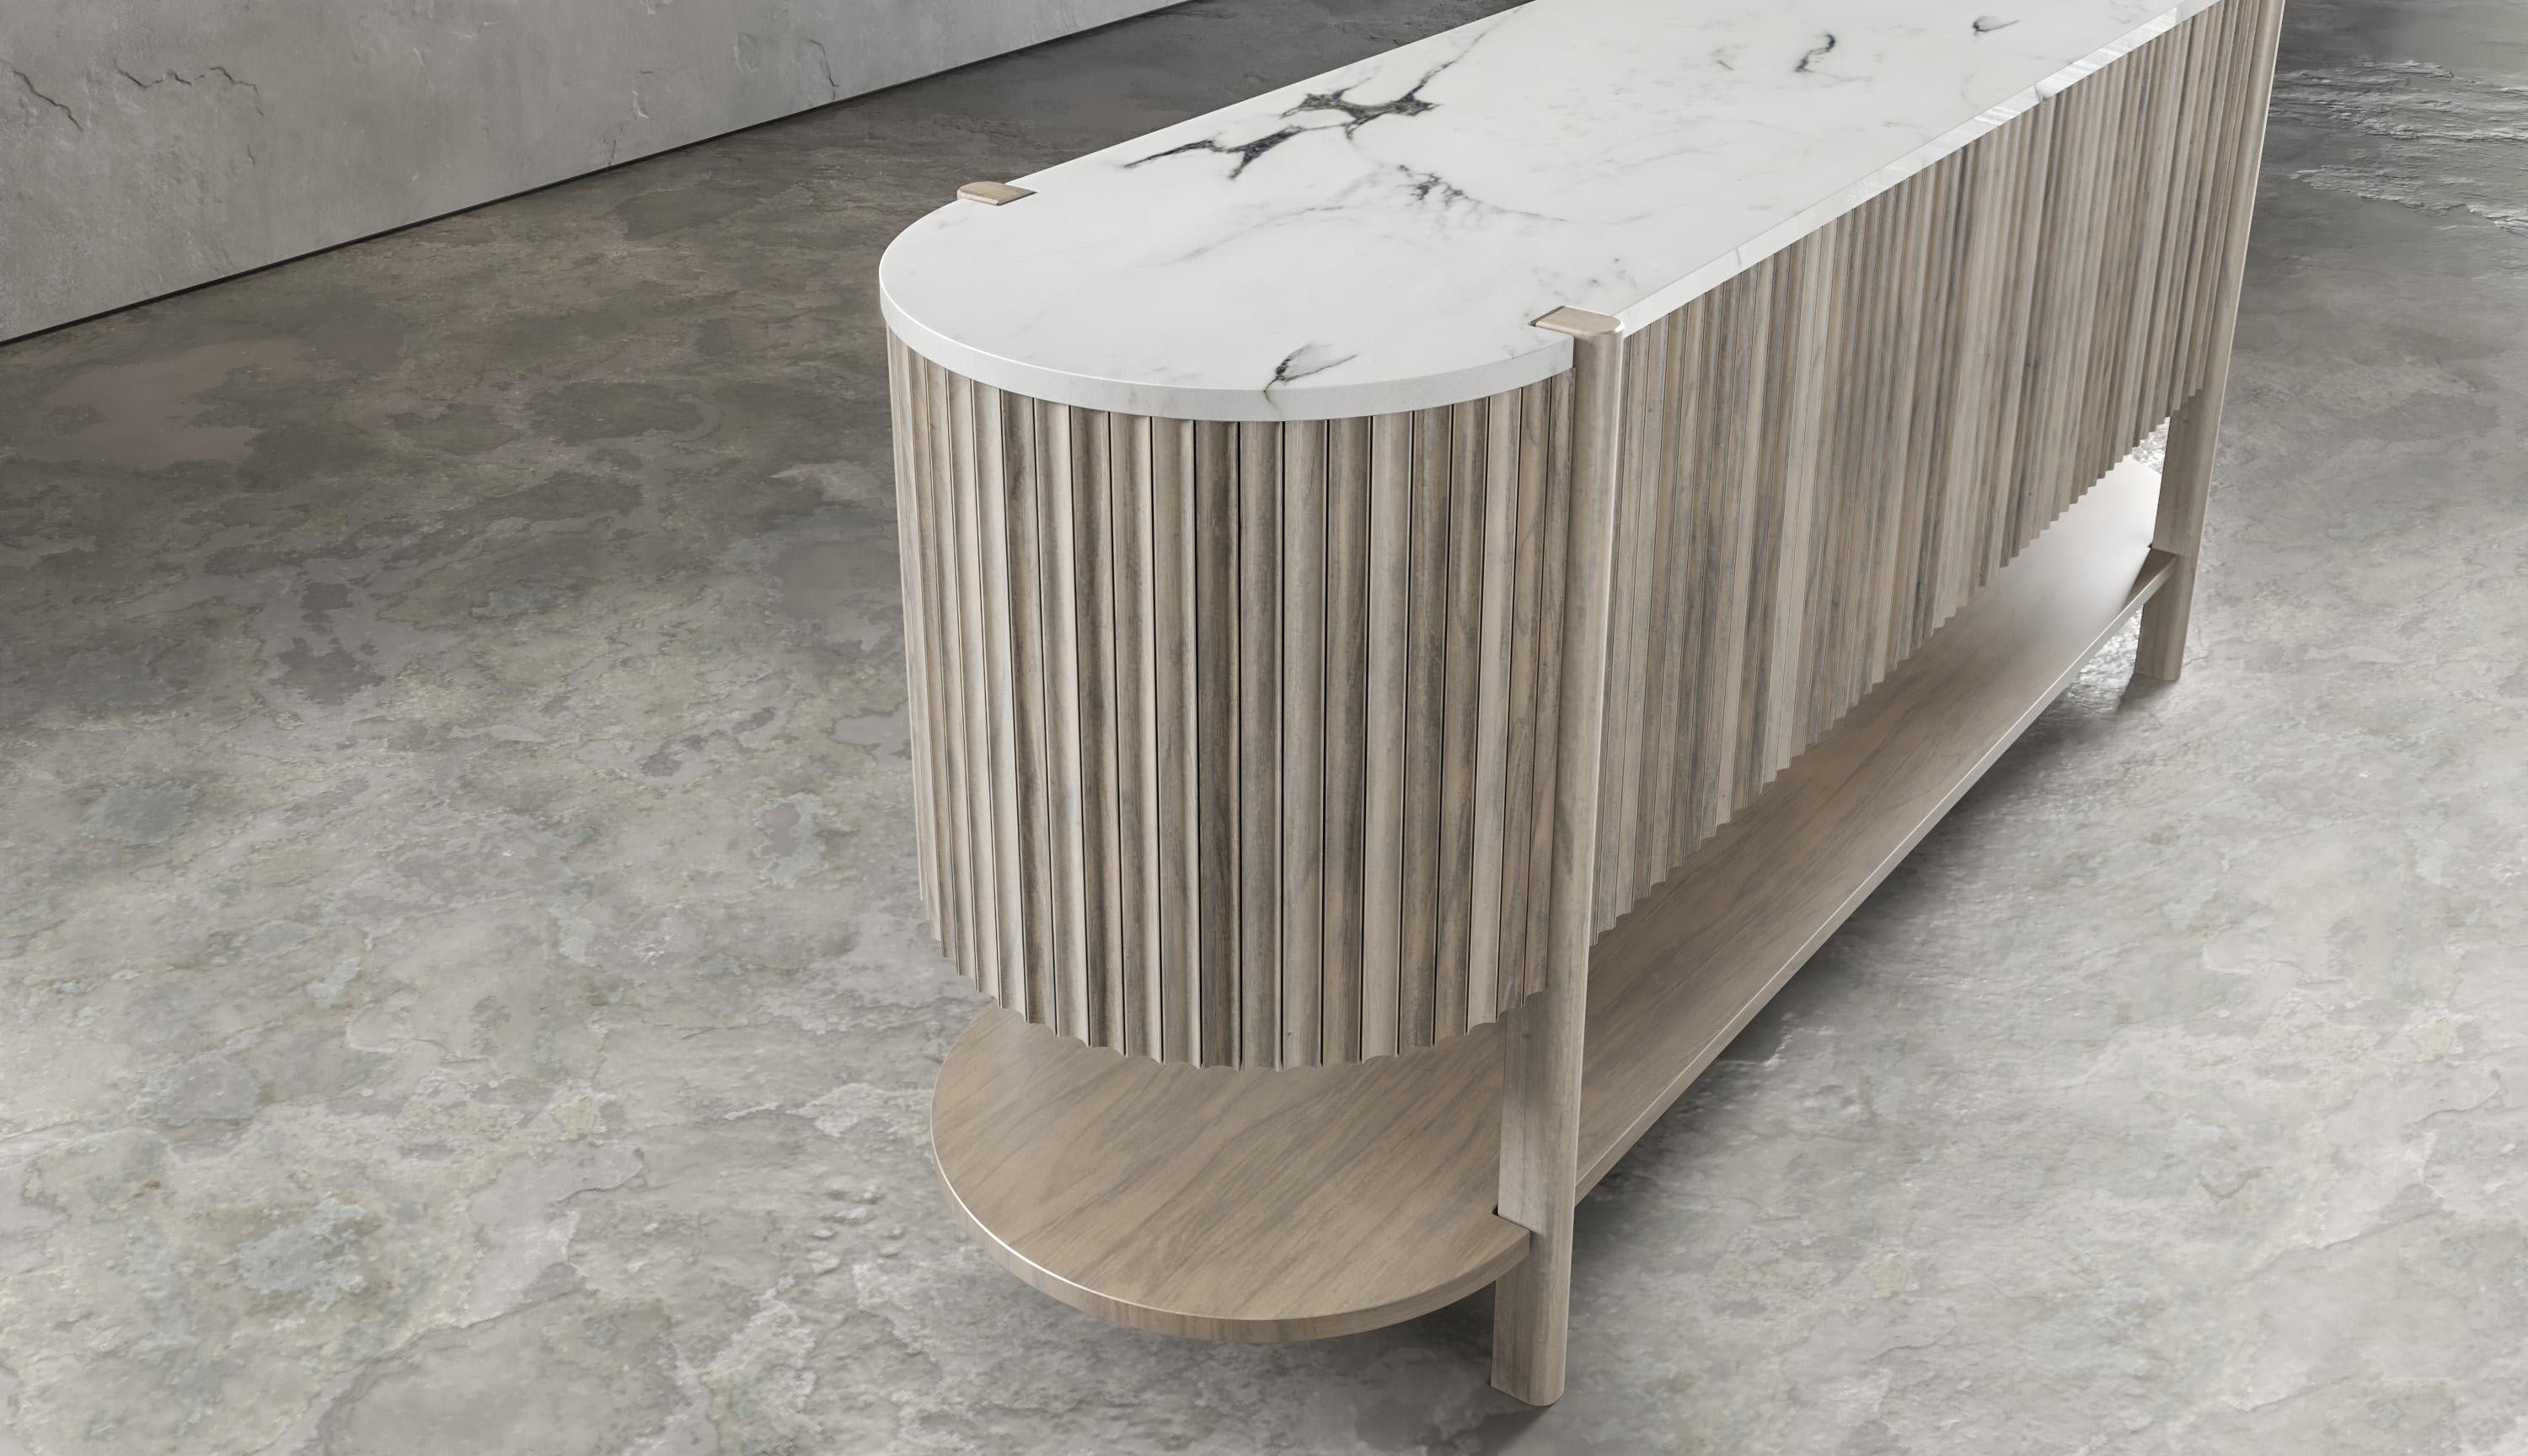 Pilar credenza by Indo Made
One of a kind
Dimensions: D 182.9, W 45.7, H76.2 cm 
Materials: Oxidized Maple, White Carrara Marble top

Different dimensions available. Also available in other materials (Oak/Maple; Hardwood or Stone top) and